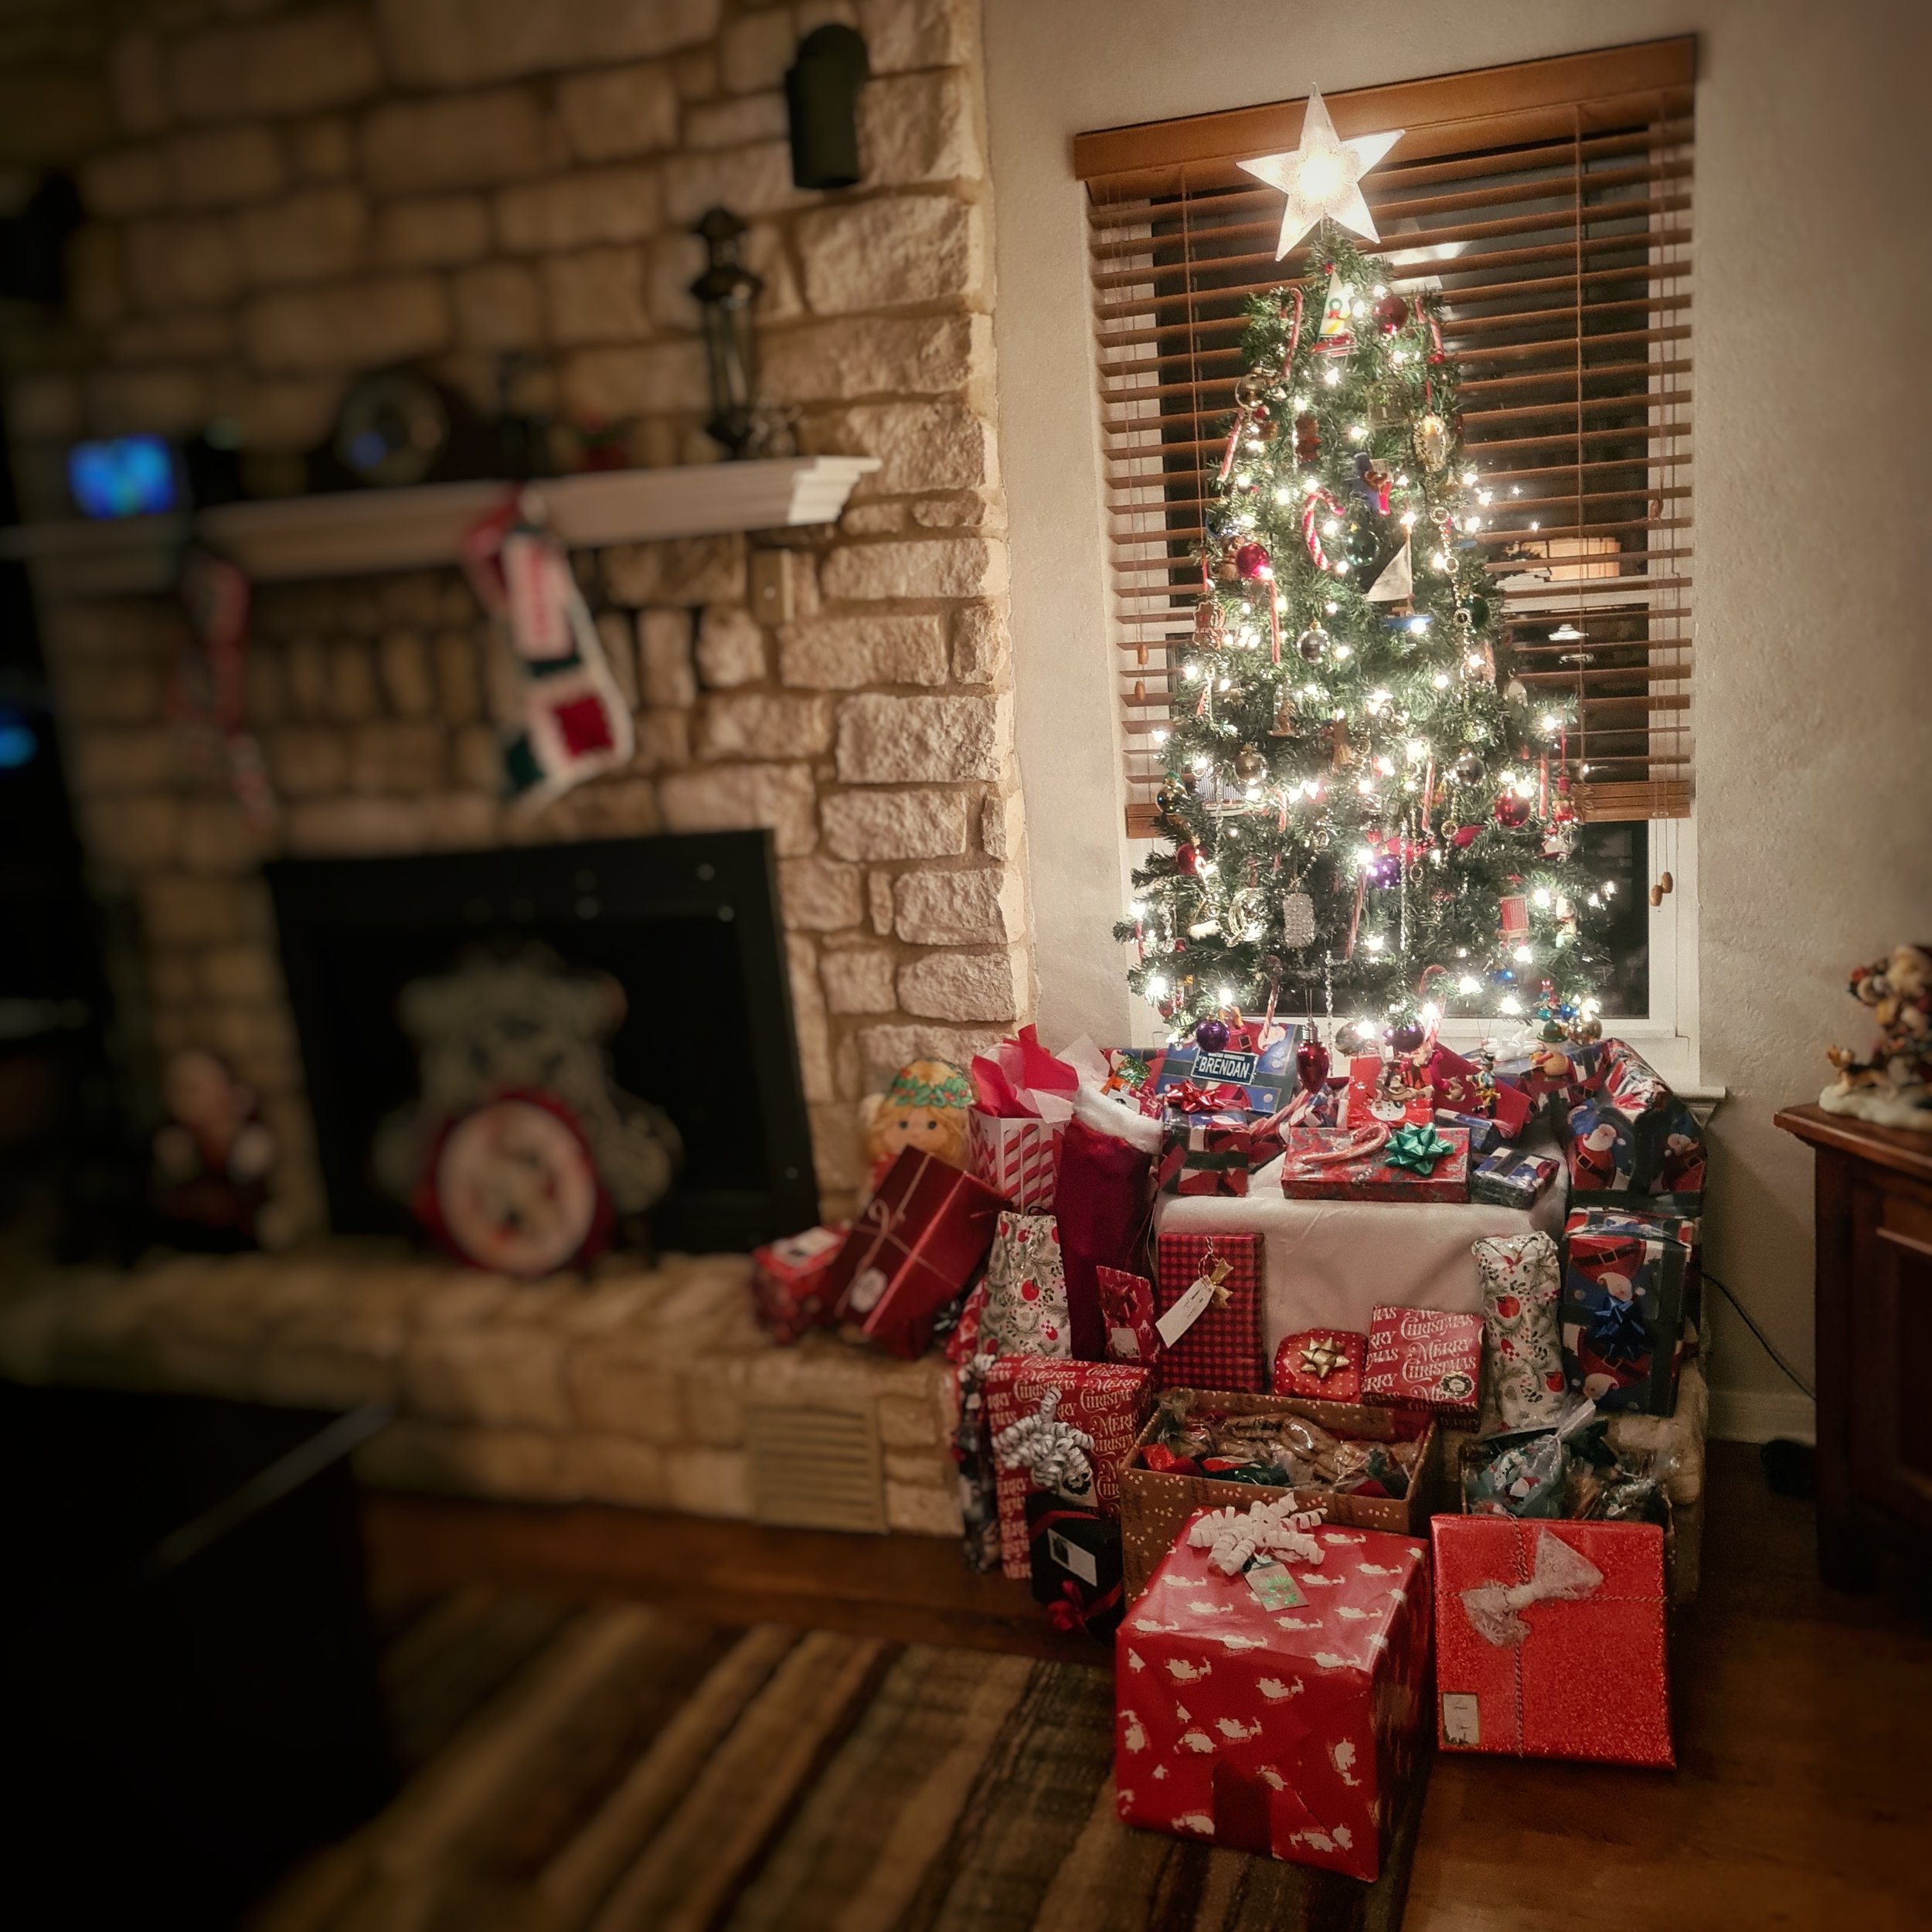 Day 358 - December 24: Ready for Christmas Day